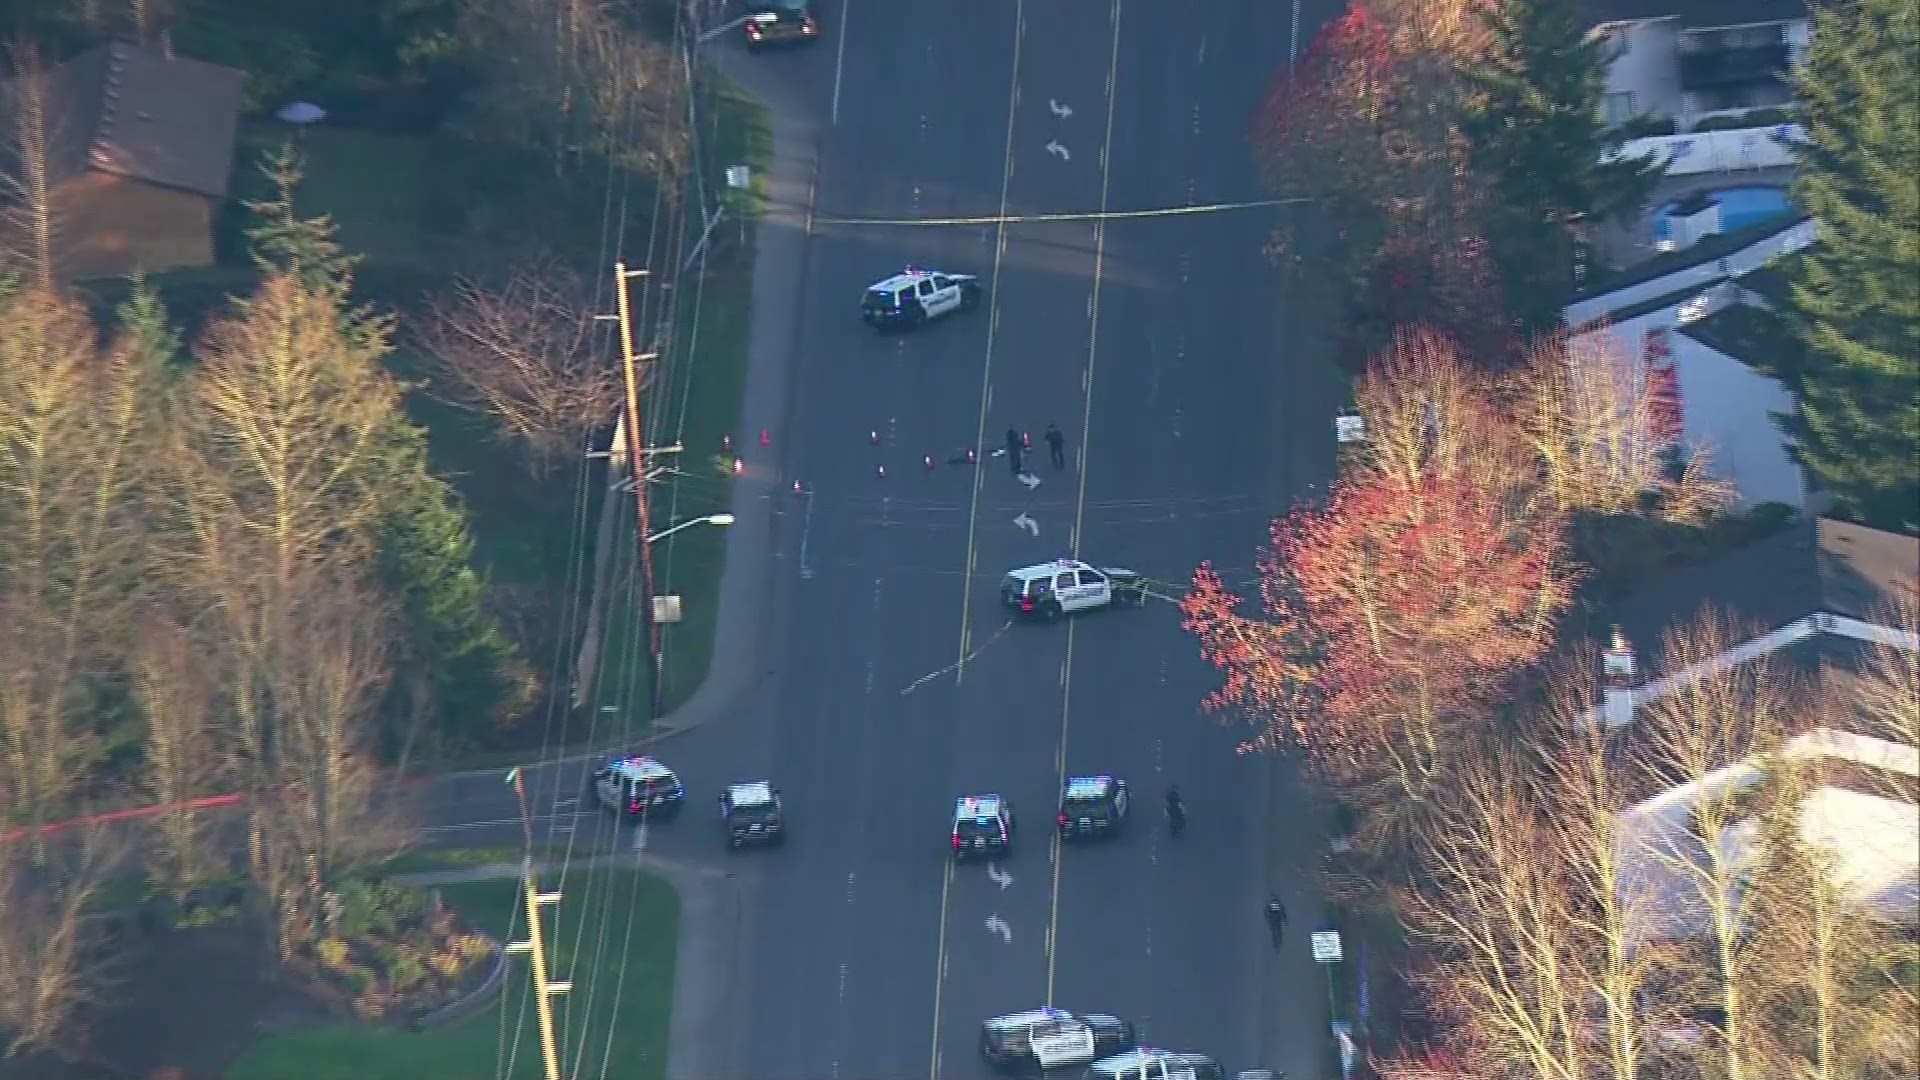 SkyKING flew over the scene of an officer-involved shooting in Kent on Thursday, December 6, 2018. The Kent Police Department said no officers were injured.